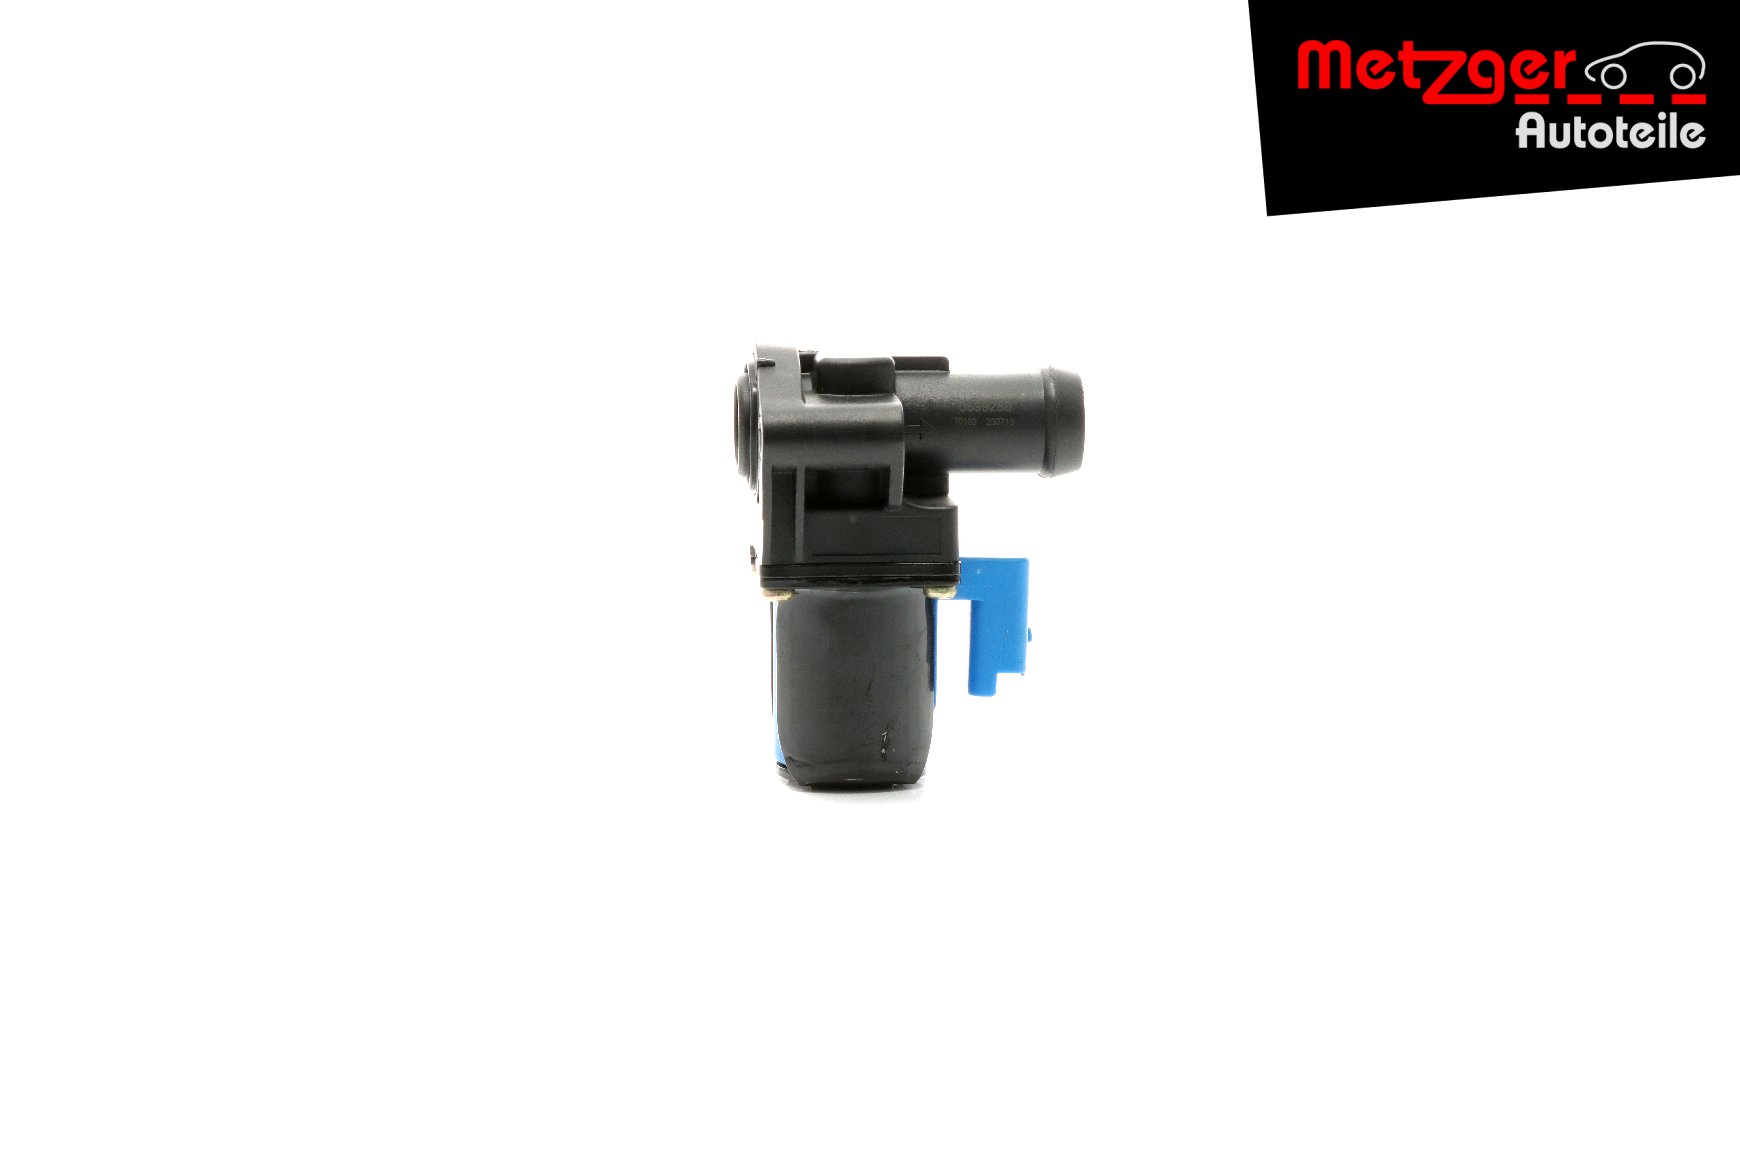 METZGER 0899289 Heater control valve Ford S-Max Mk1